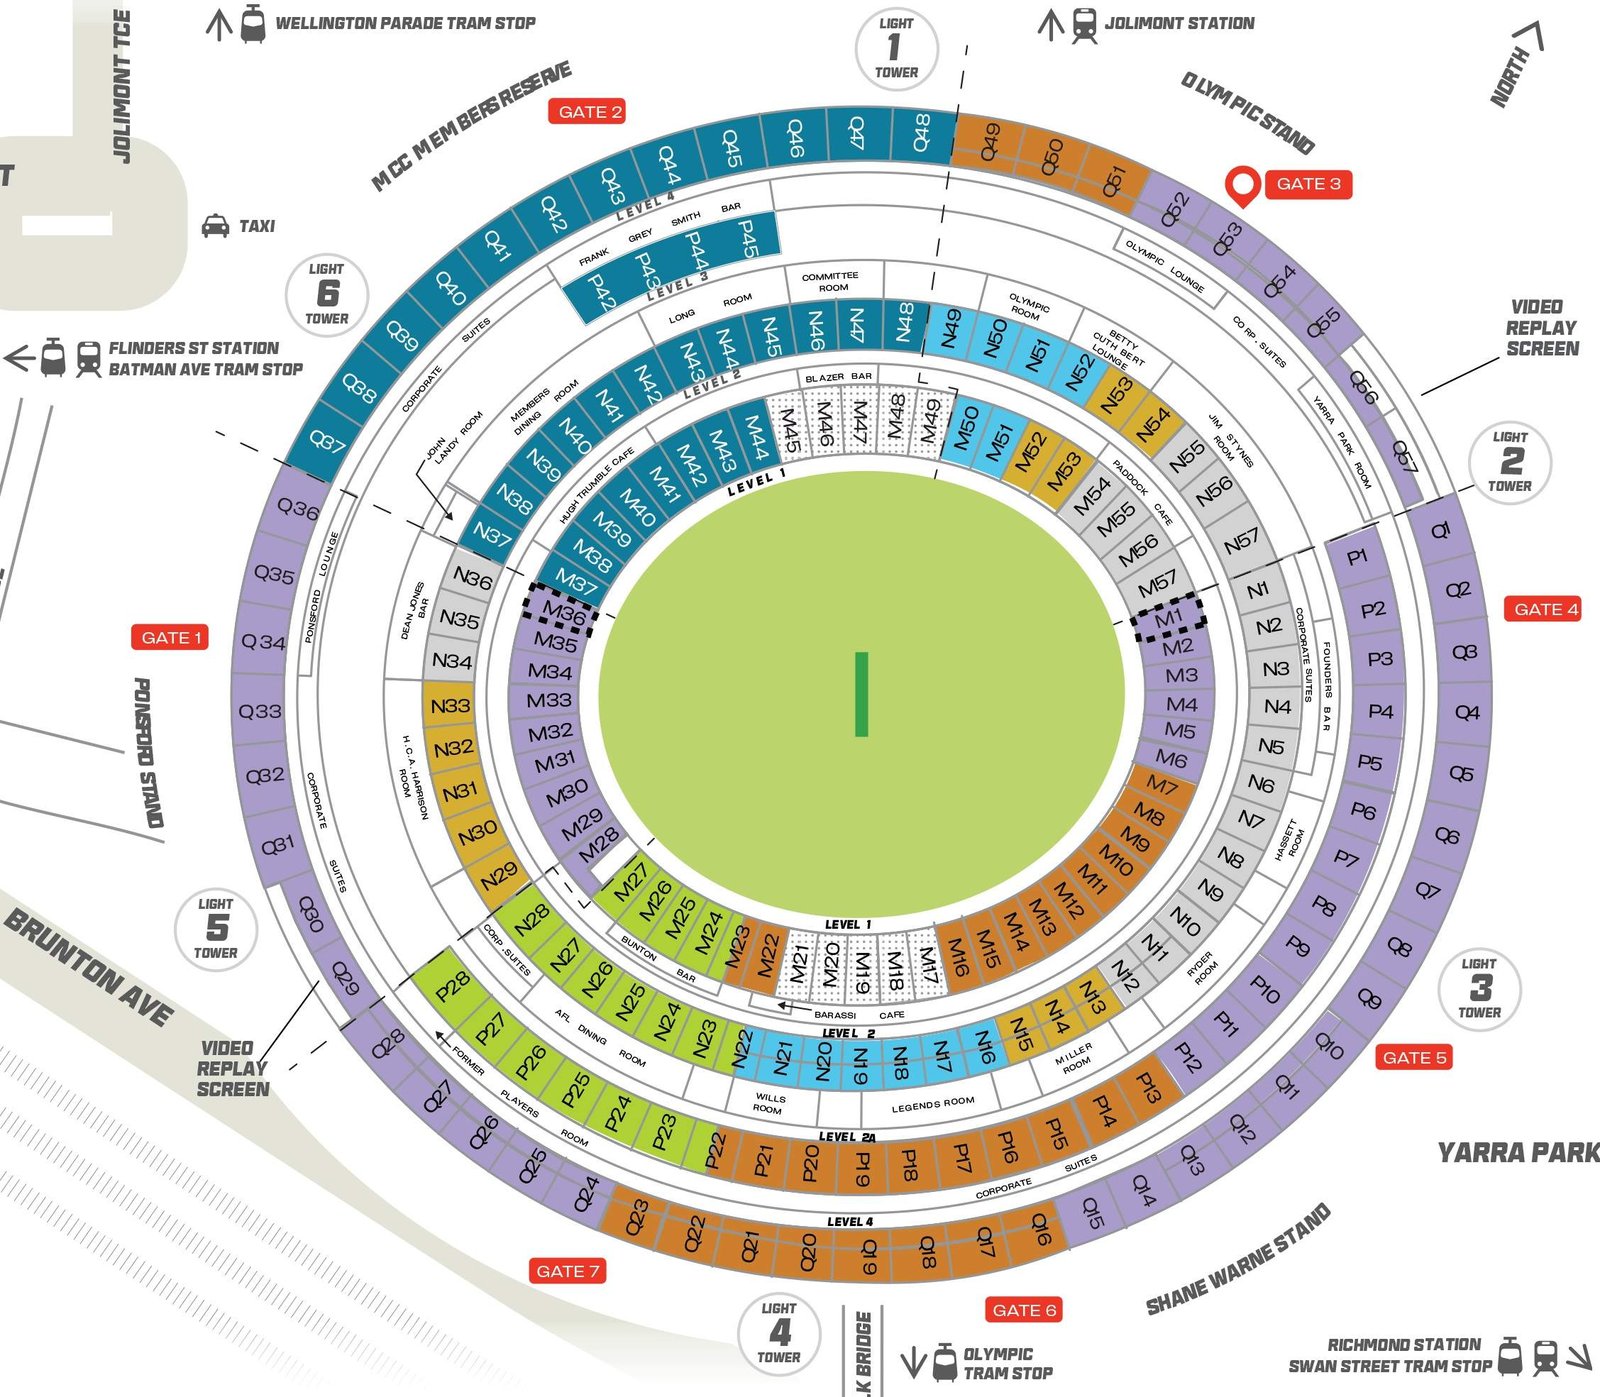 Melbourne Cricket Ground Seating Plan 2023 with Rows and Seat Number